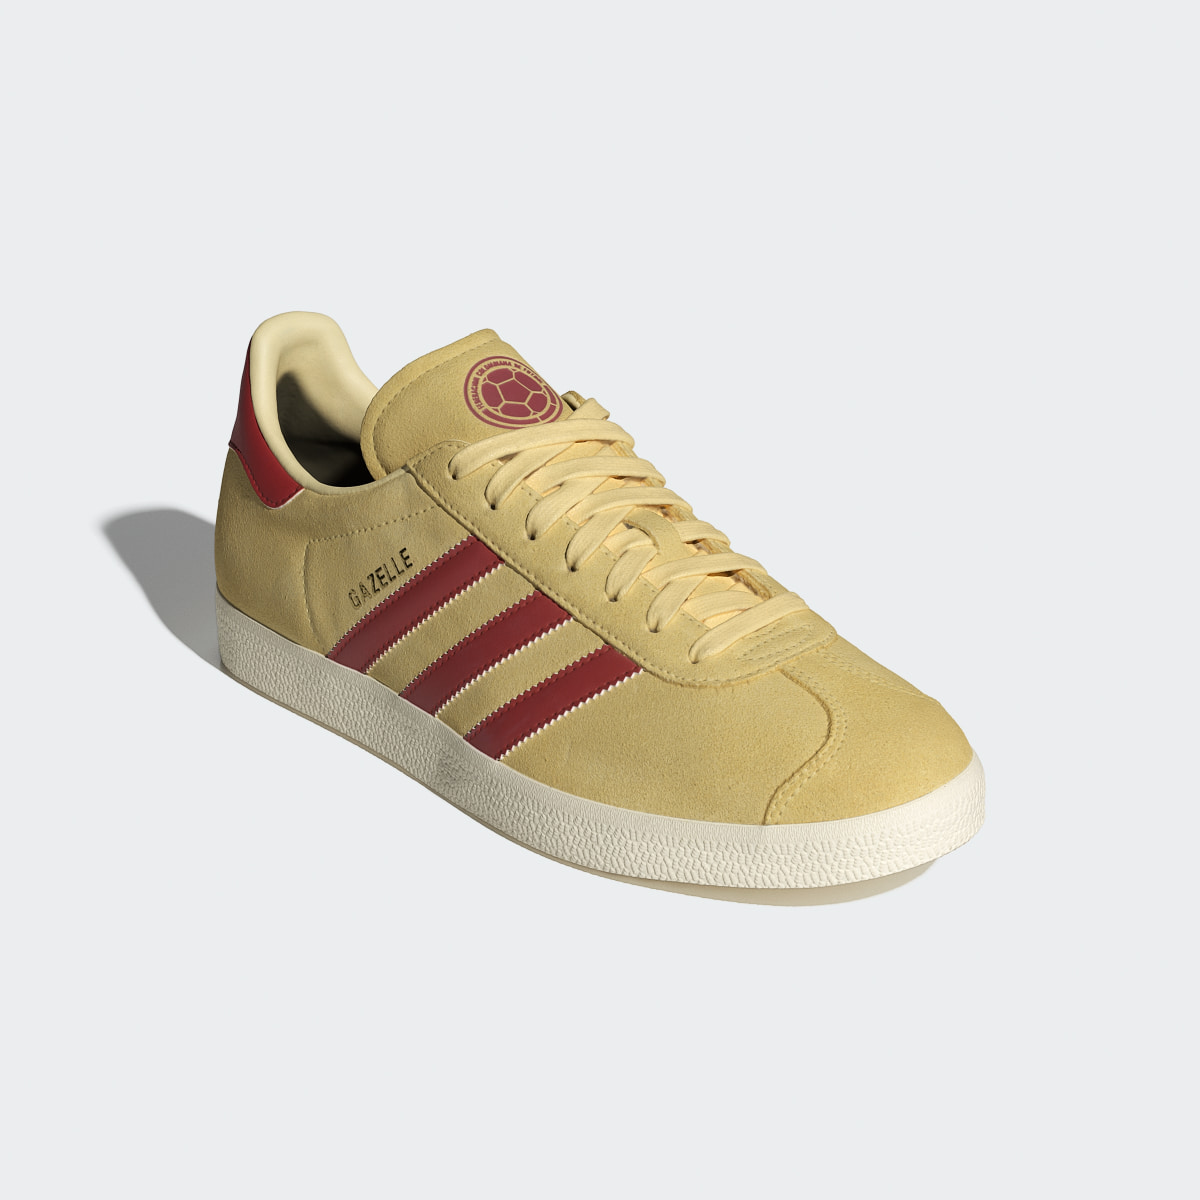 Adidas Gazelle Colombia Shoes. 5